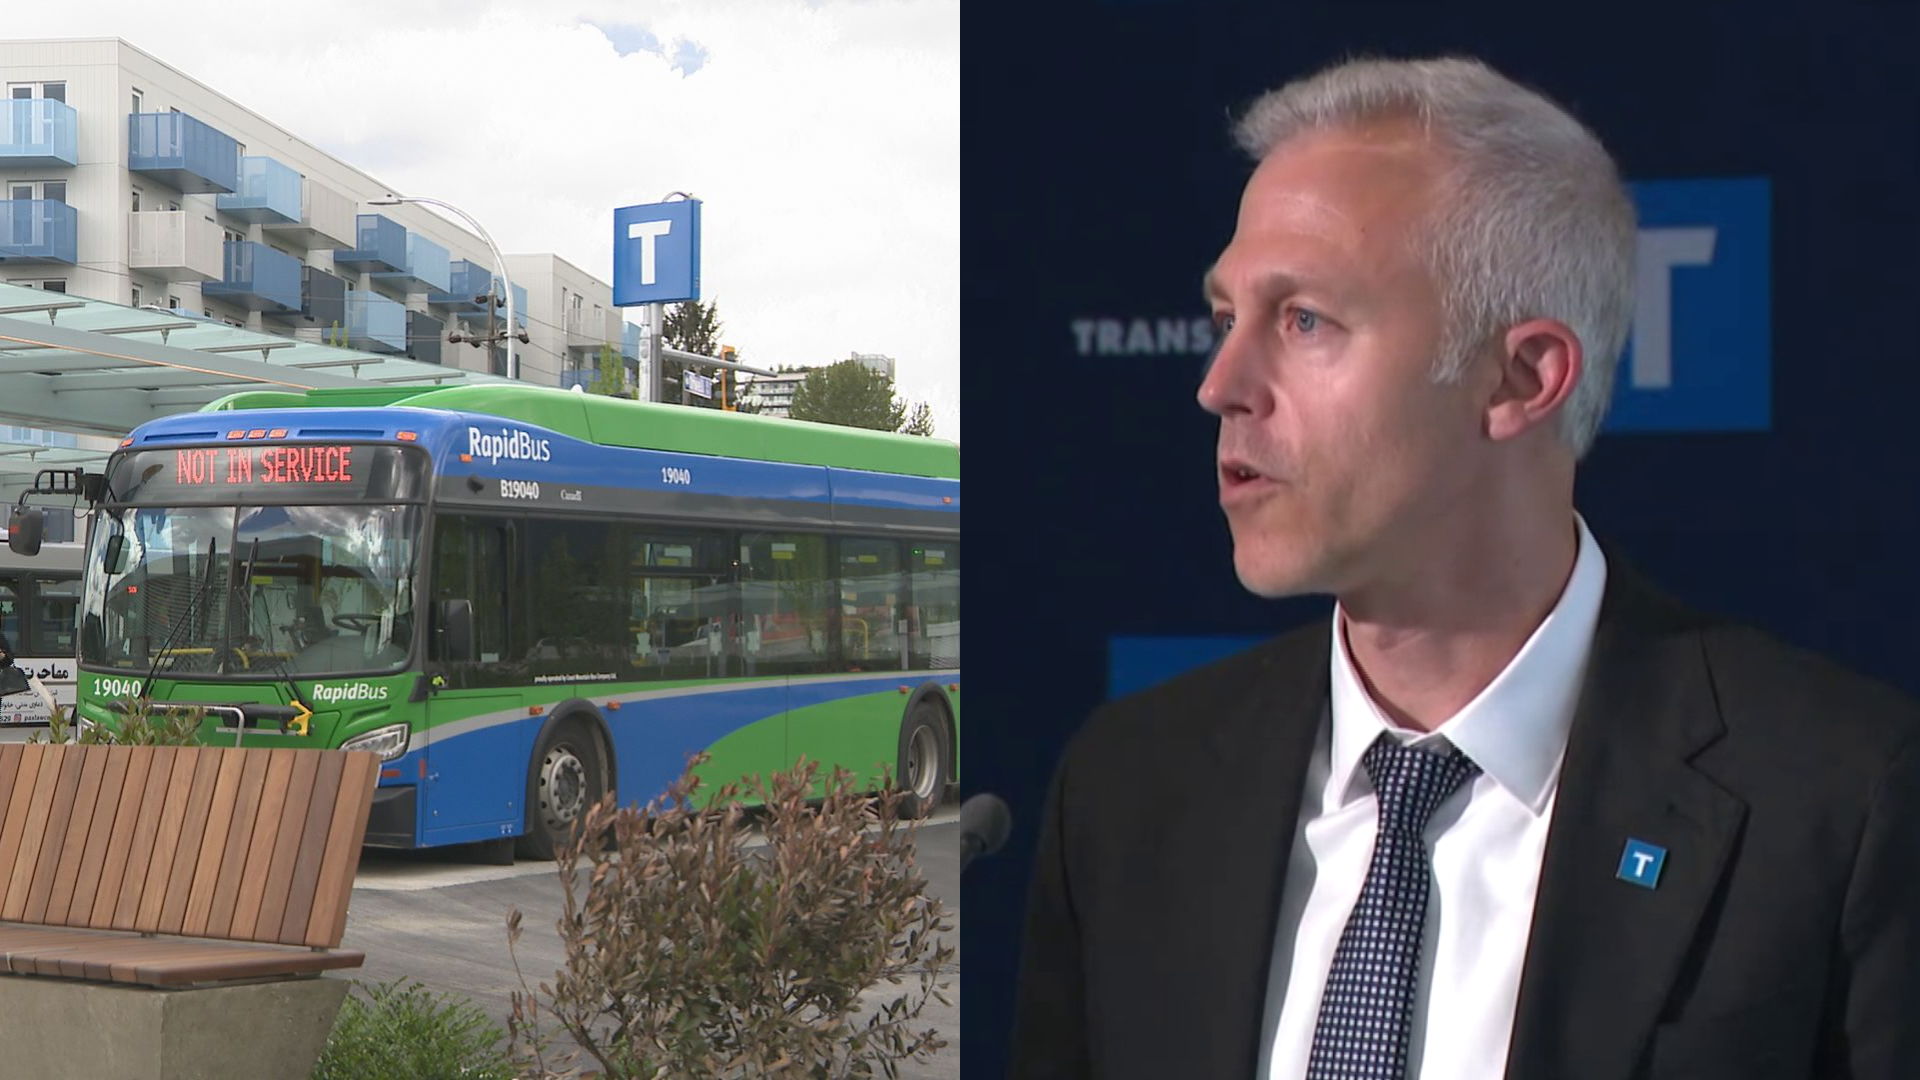 TransLink warns of major service cuts if funding not found